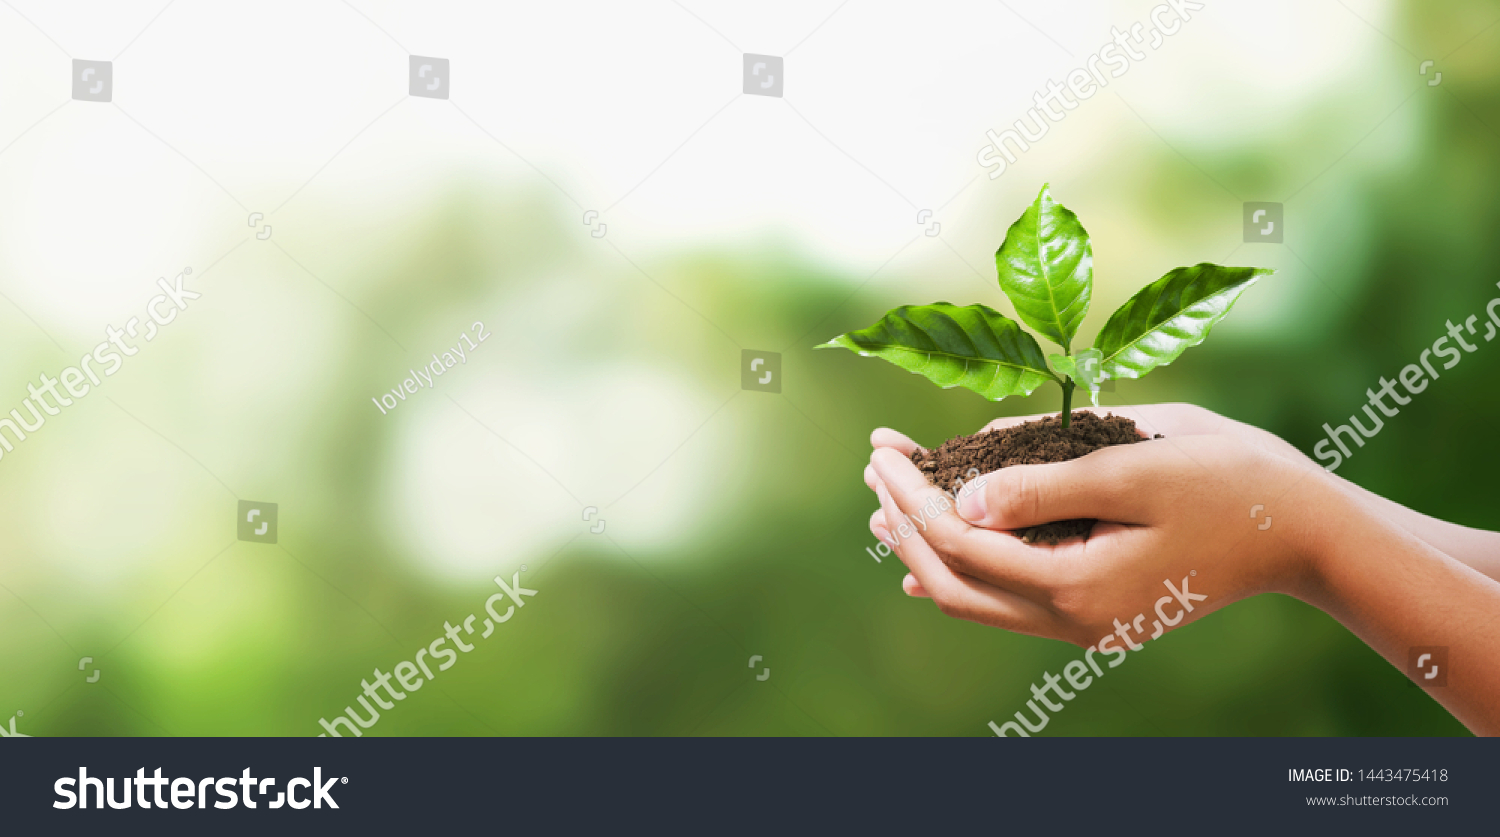 hand holding young plant on blur green nature background. concept eco earth day #1443475418